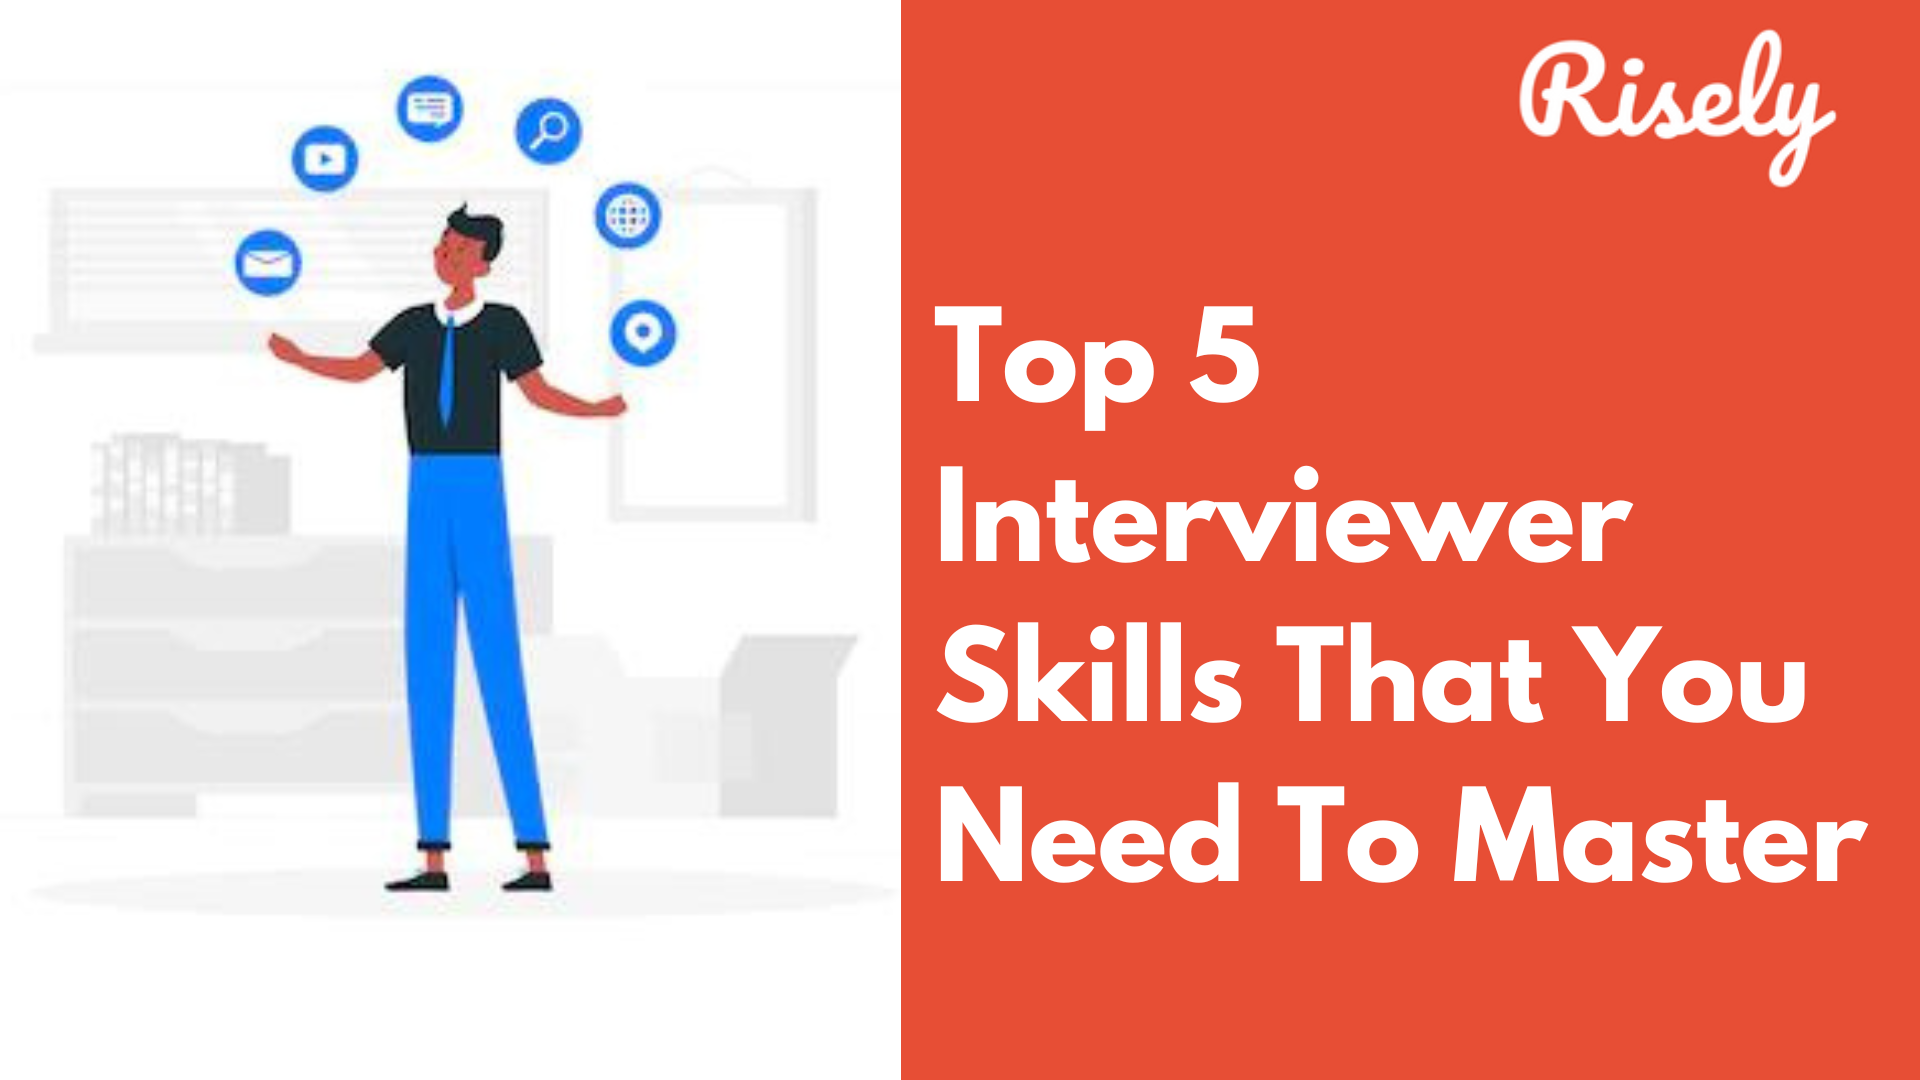 Top 5 Interviewer Skills That You Need To Master